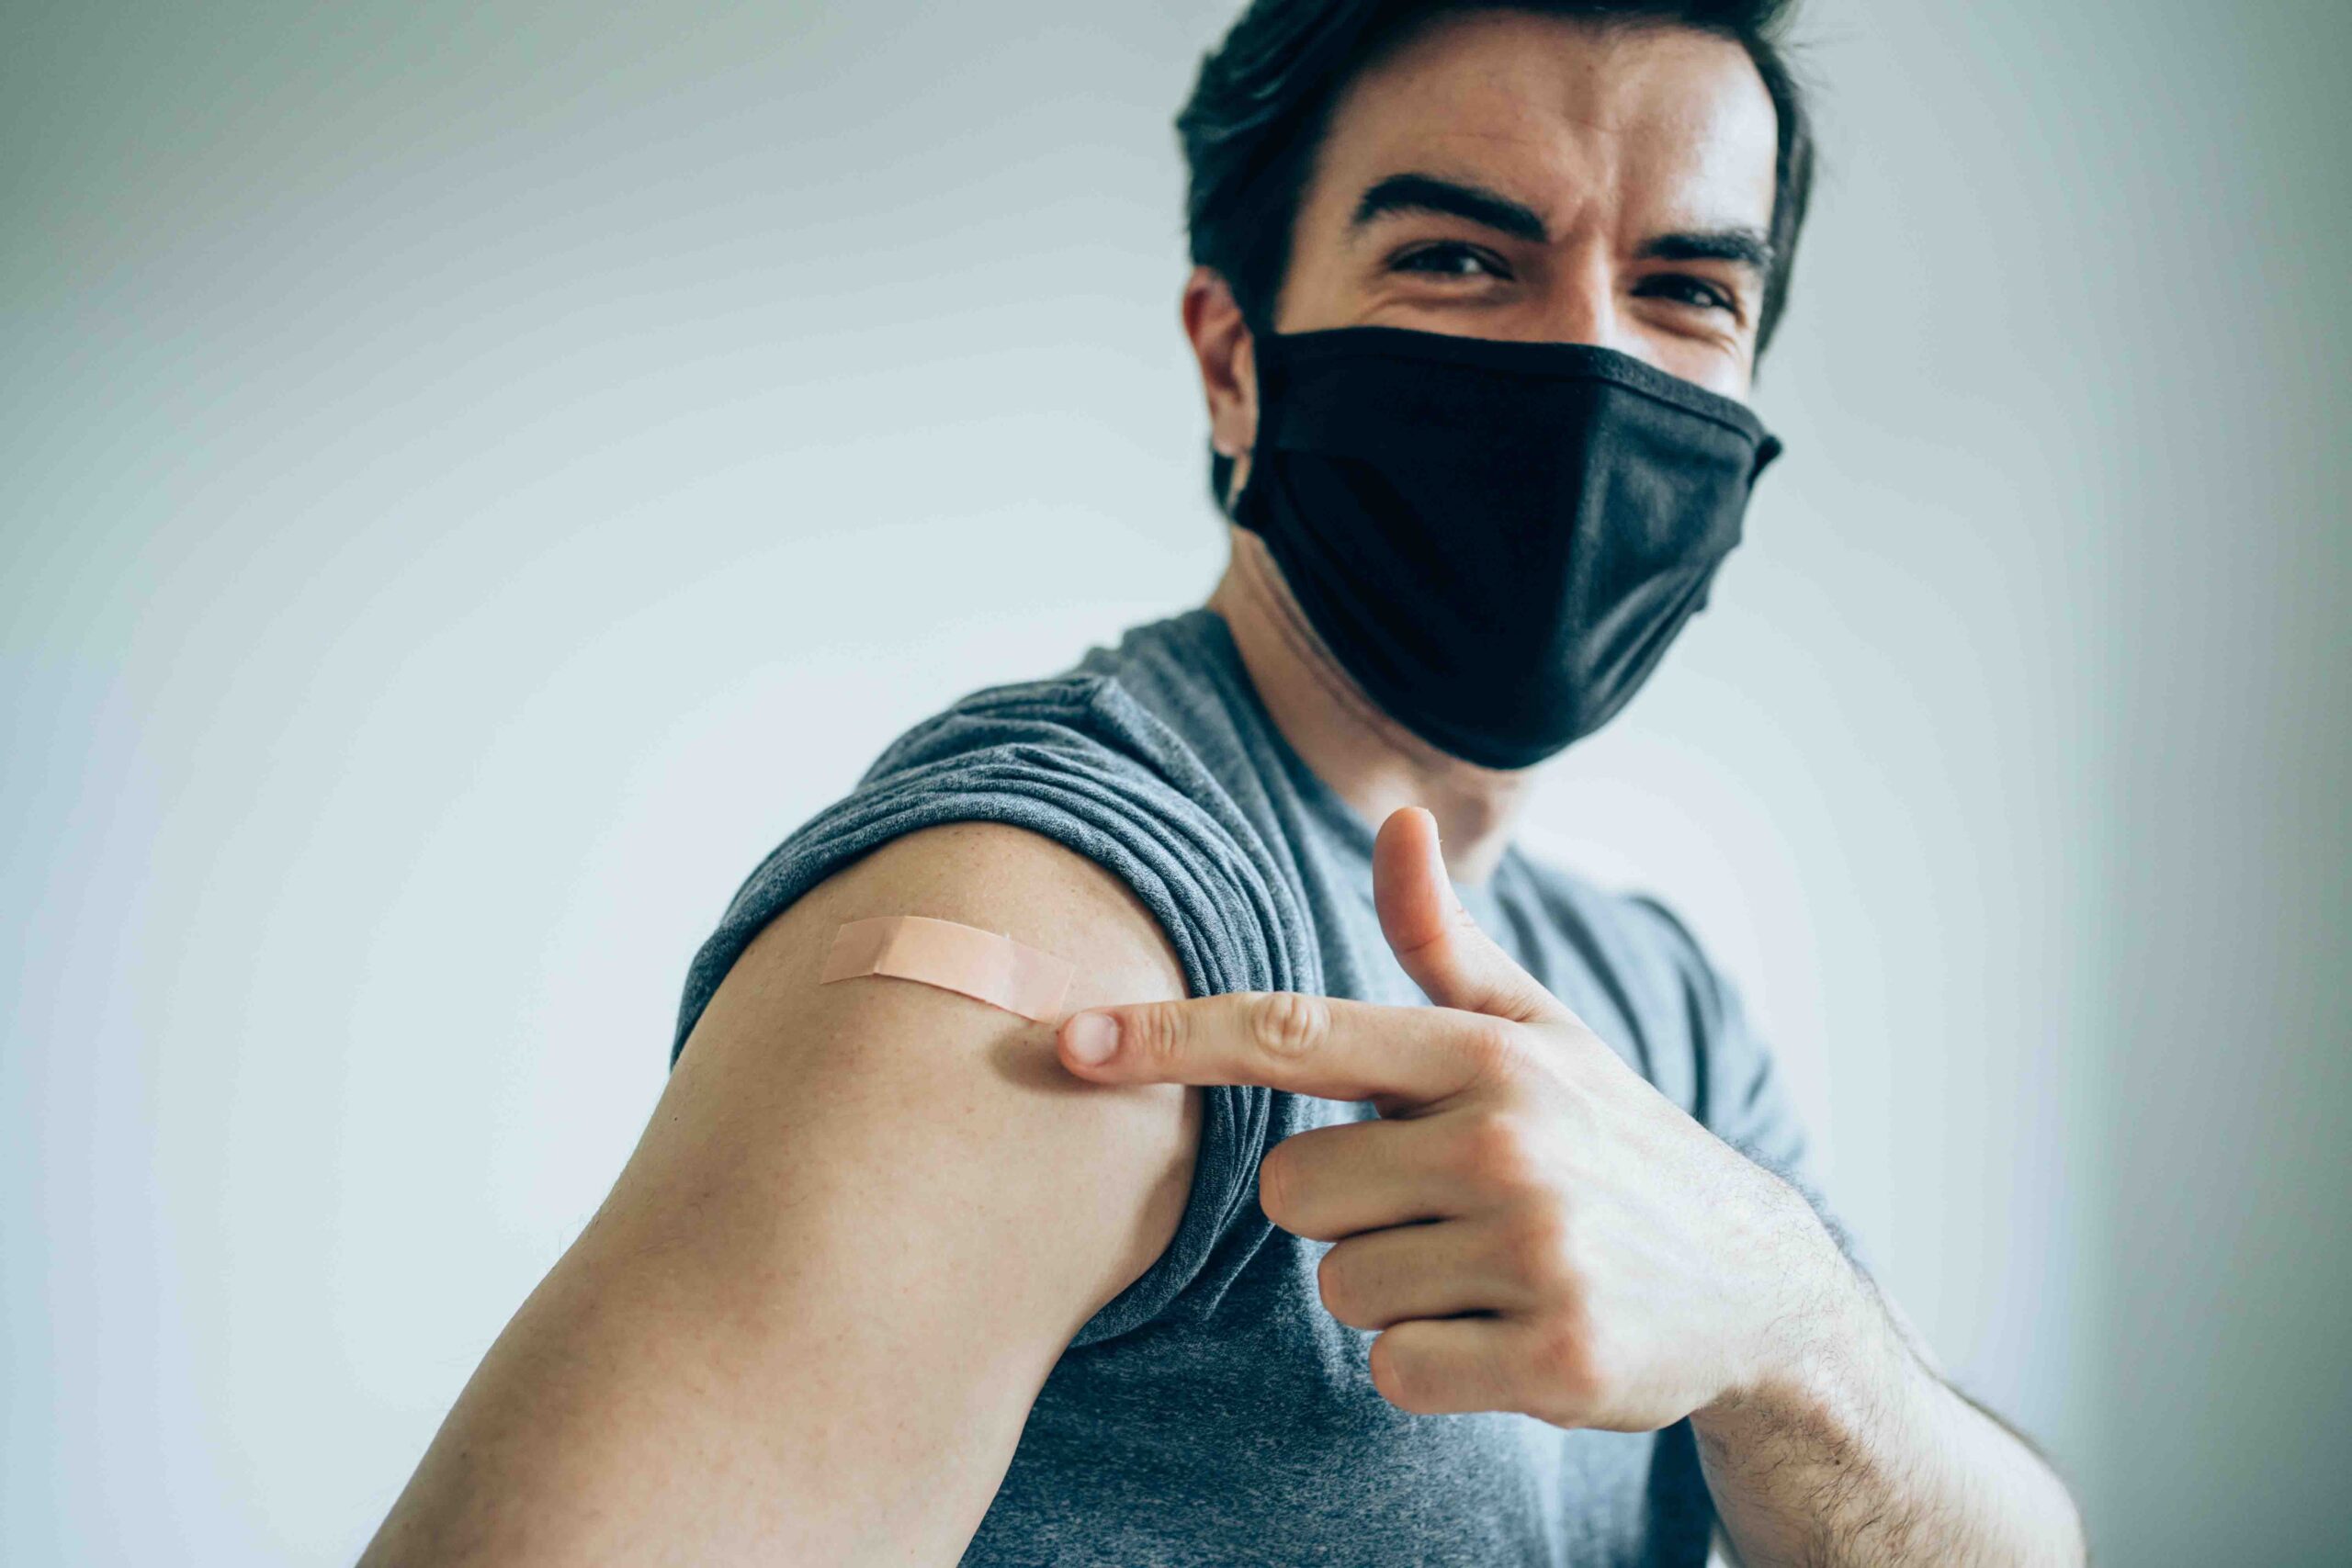 Man wearing protective face mask and pointing at his arm with a bandage after receiving COVID-19 vaccine. Young man showing his shoulder after getting coronavirus vaccine at vaccination center. Focus is on the bandage.